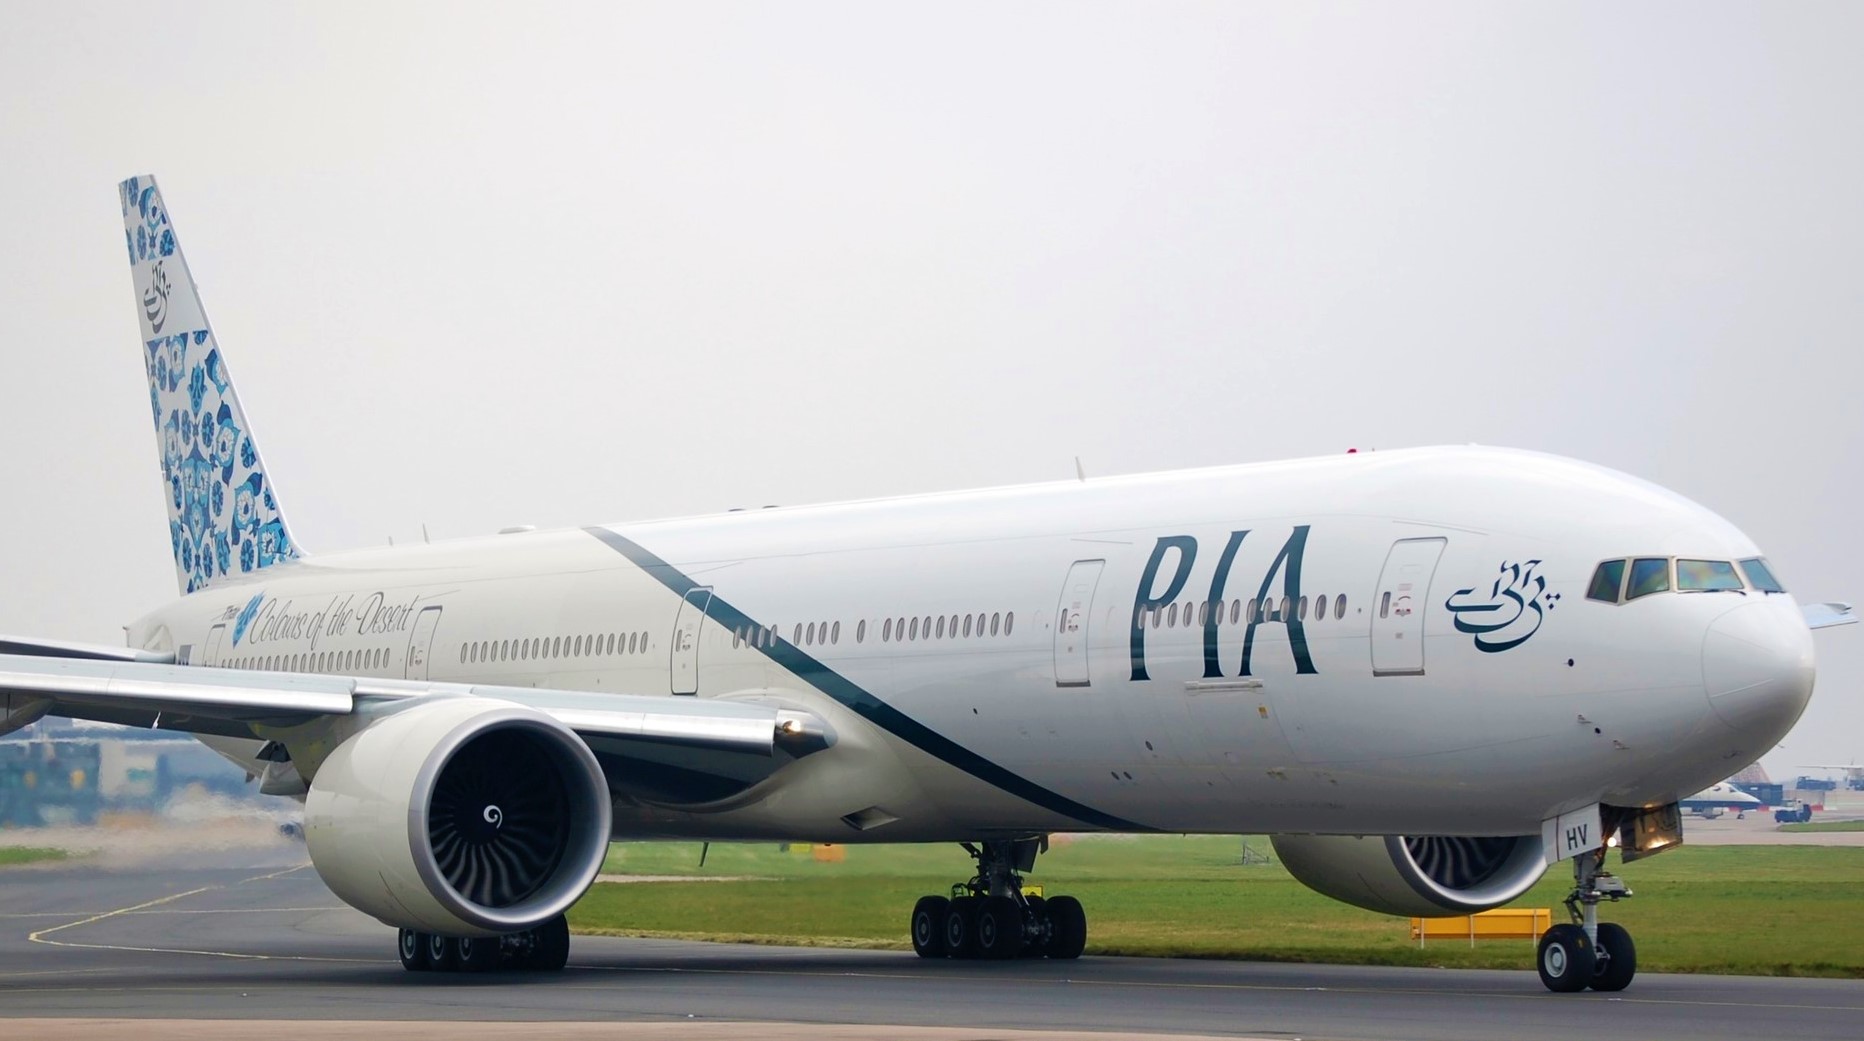 Pakistan International Airlines (PIA) Boeing 777-300 aircraft got stuck on the threshold (turning head) of Runway 36L for around 52 minutes !